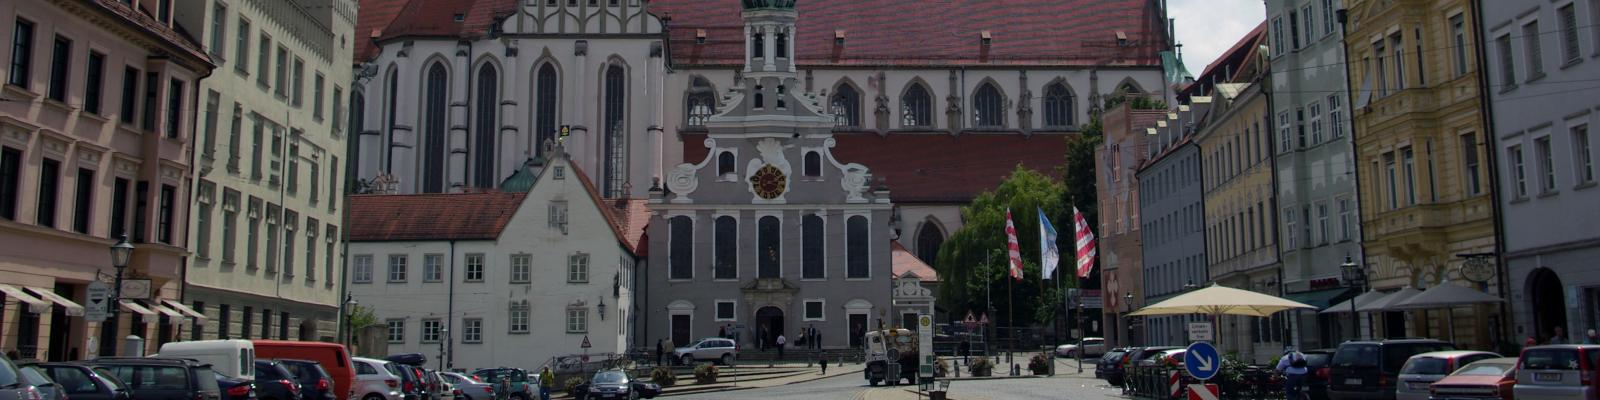 Basilica of St Ulrich and Afra, Augsburg, Germany